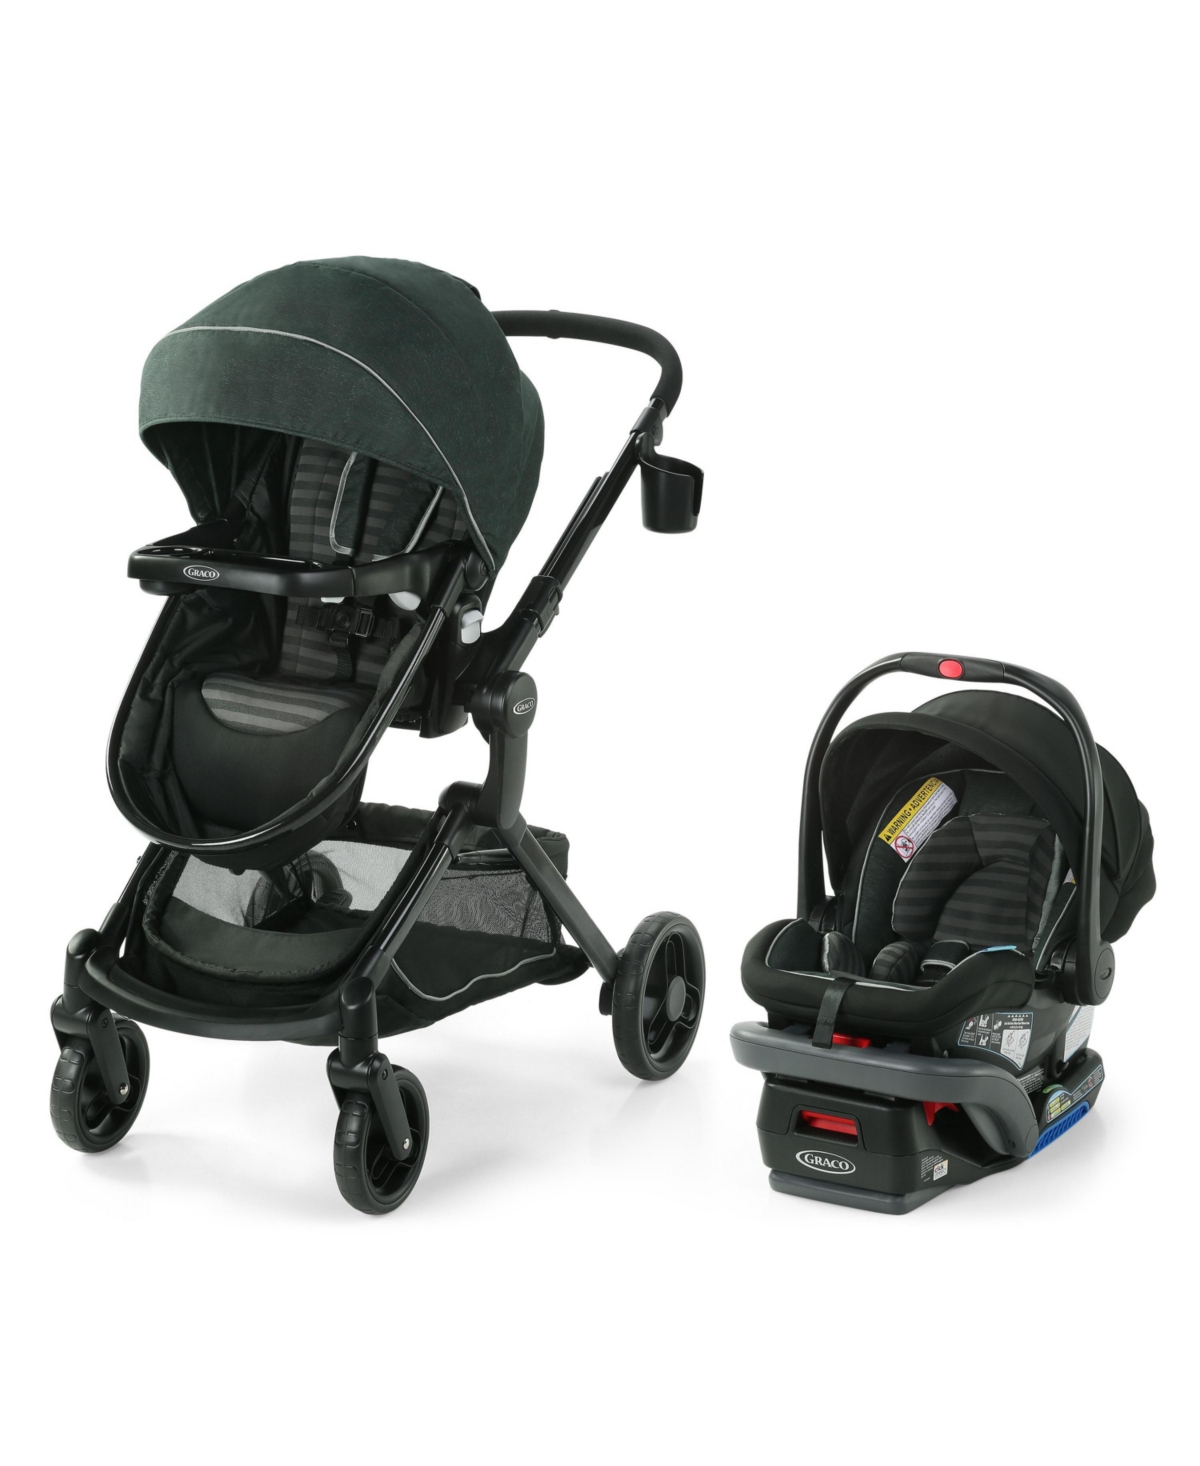 Graco Modes Nest Dlx Travel System In Raven